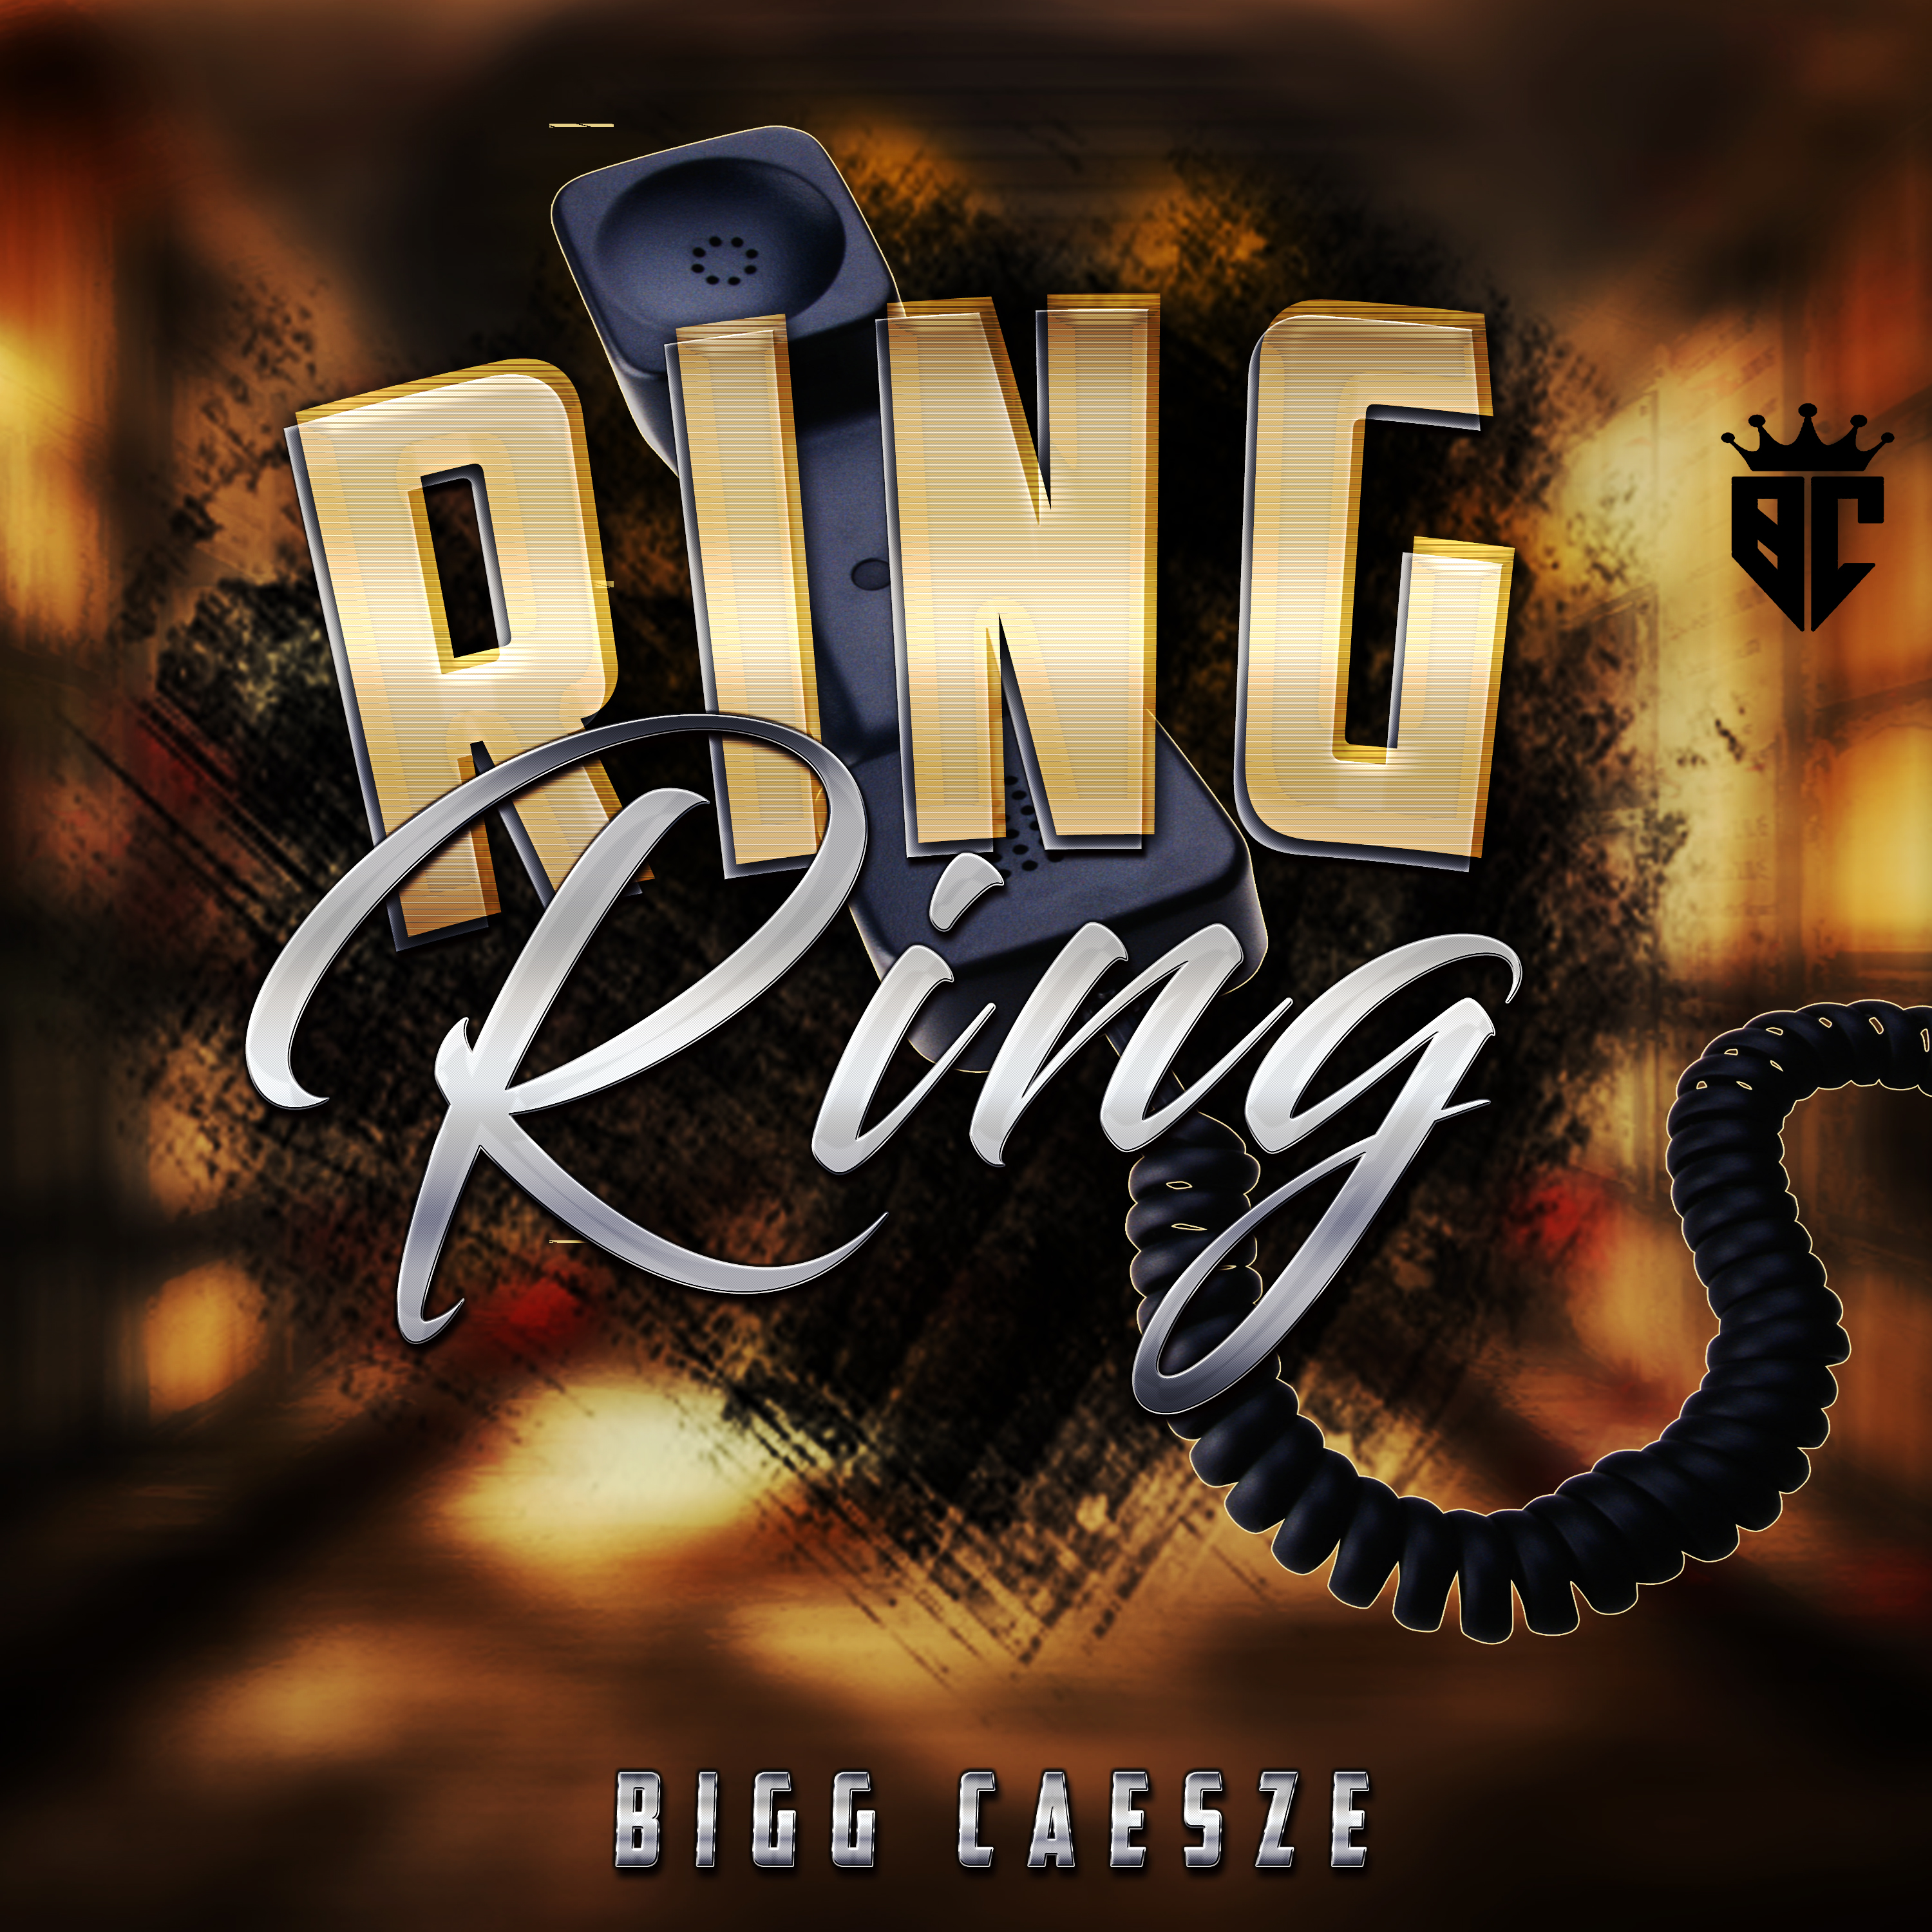 Art for Ring Ring by Bigg Caesze